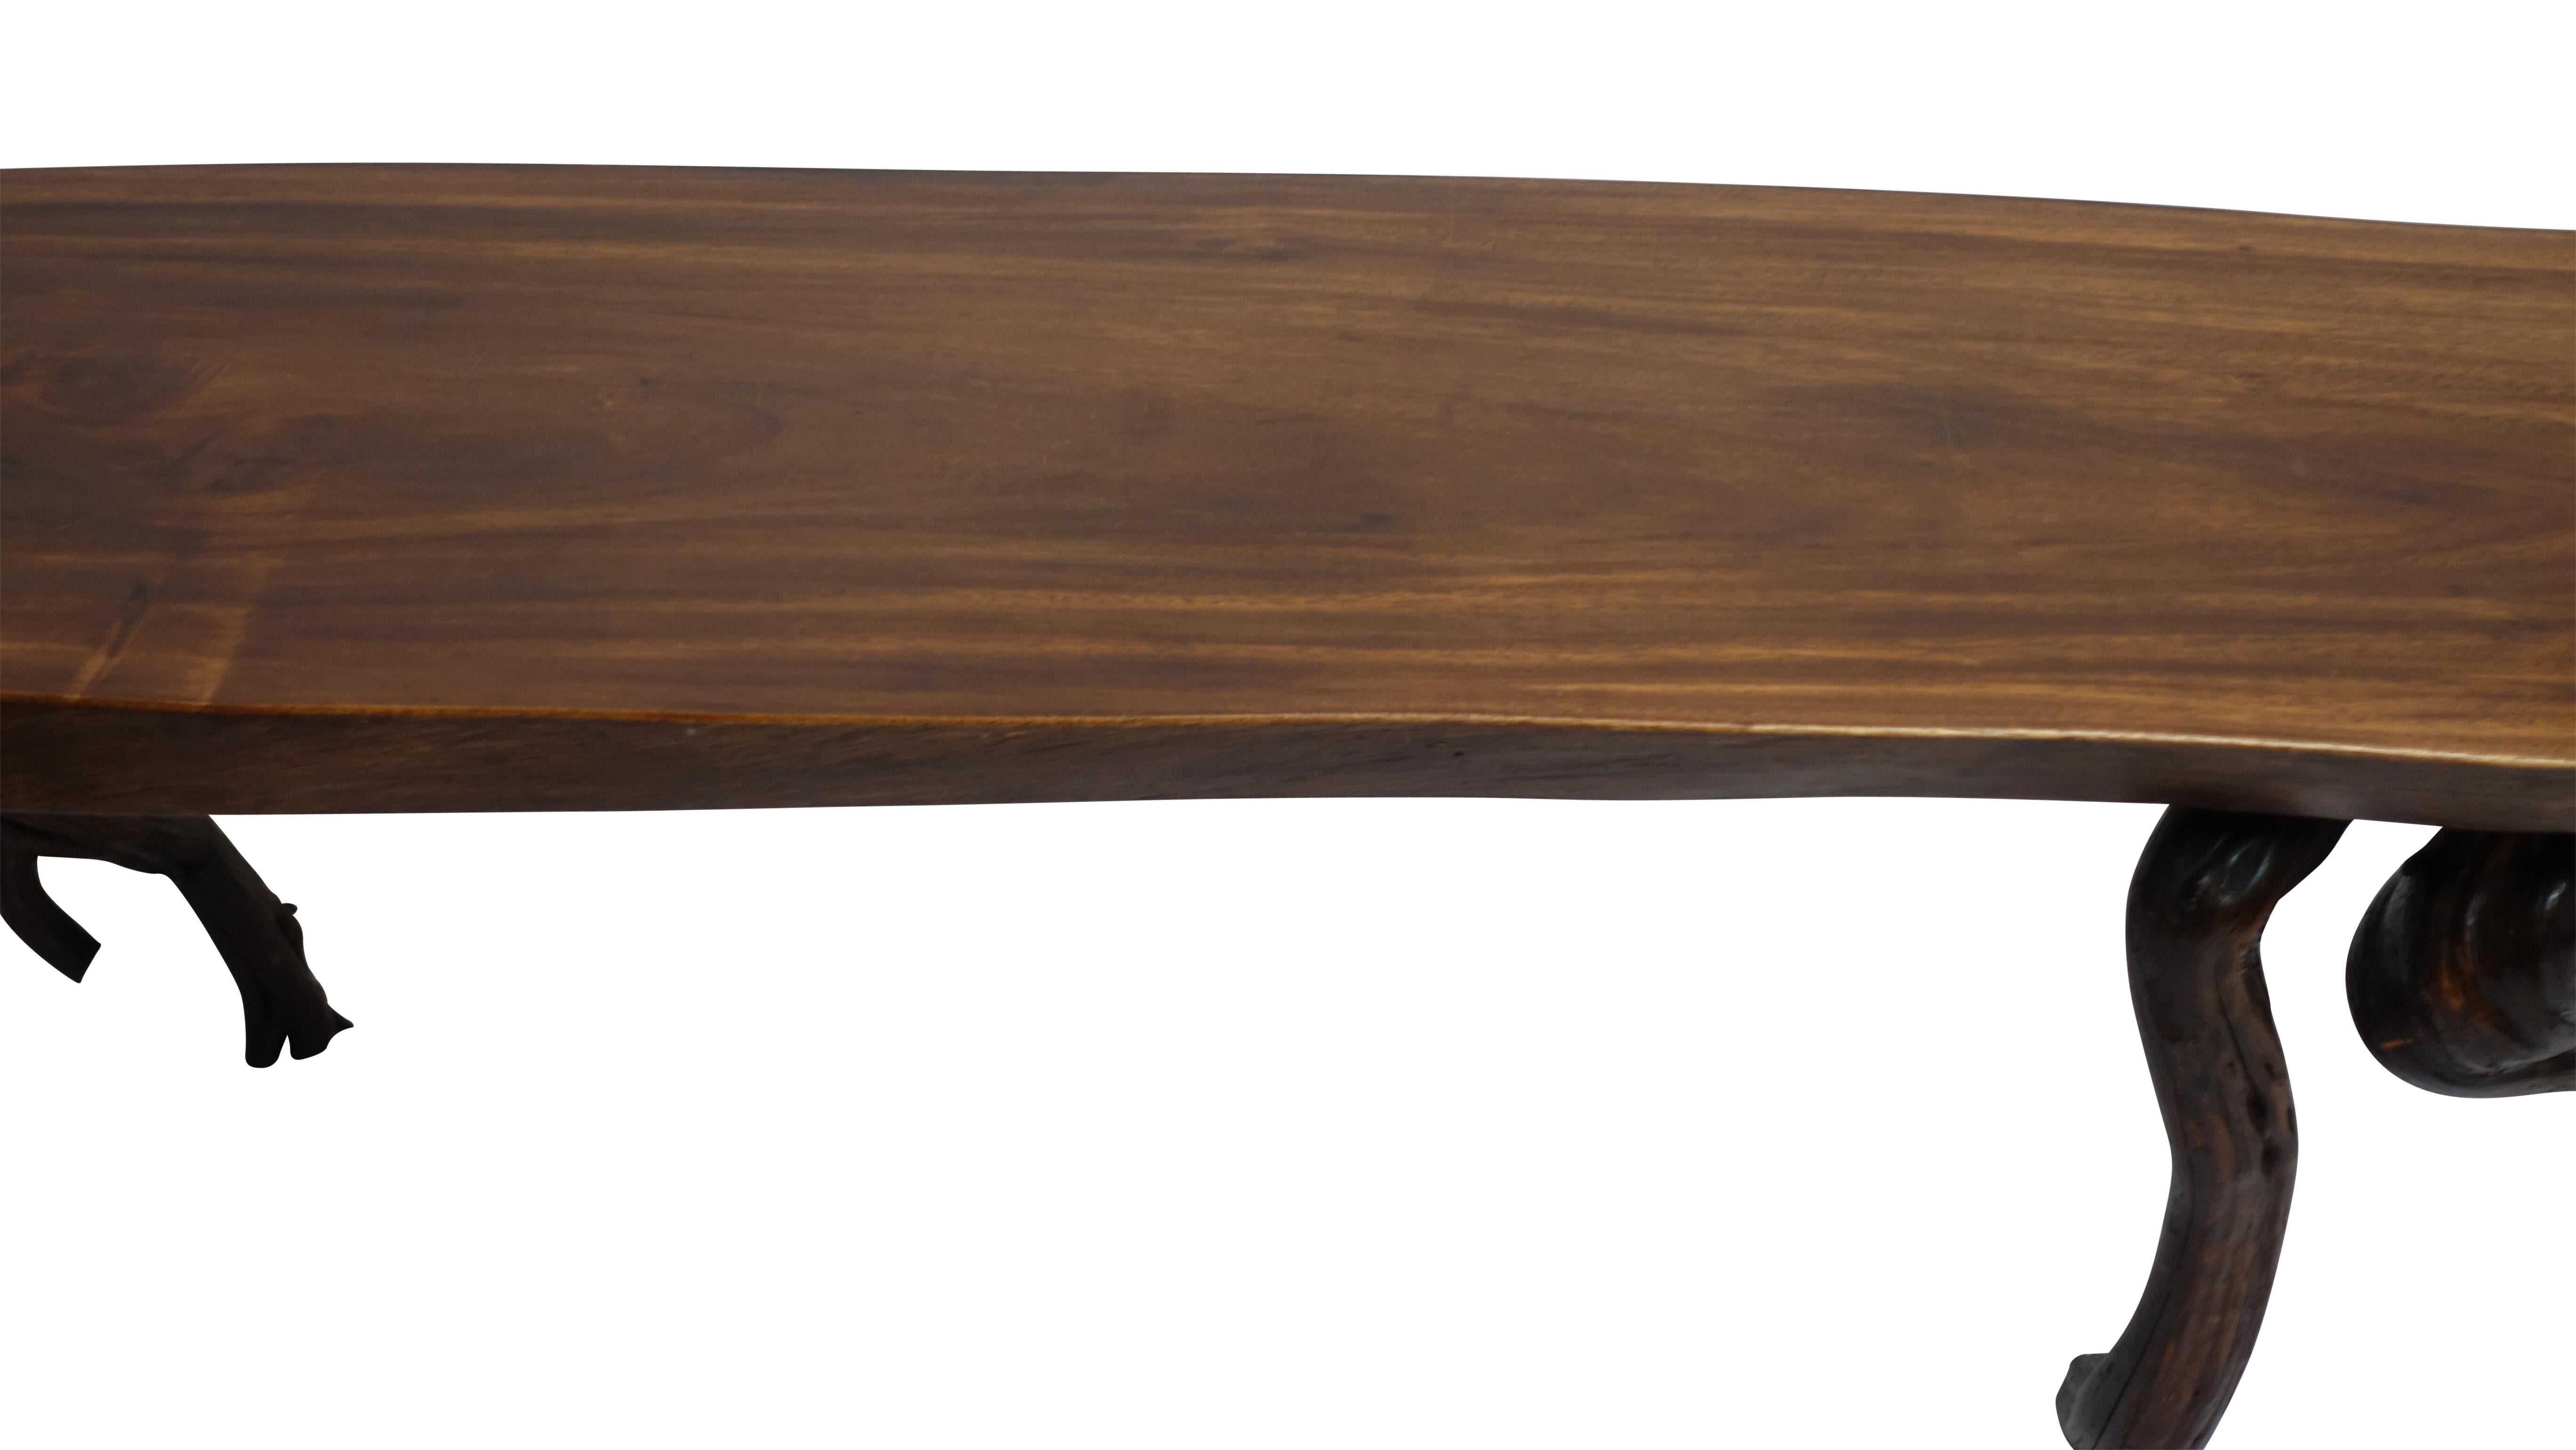 Large Walnut Slab Coffee Table, American, Mid-20th Century For Sale 6